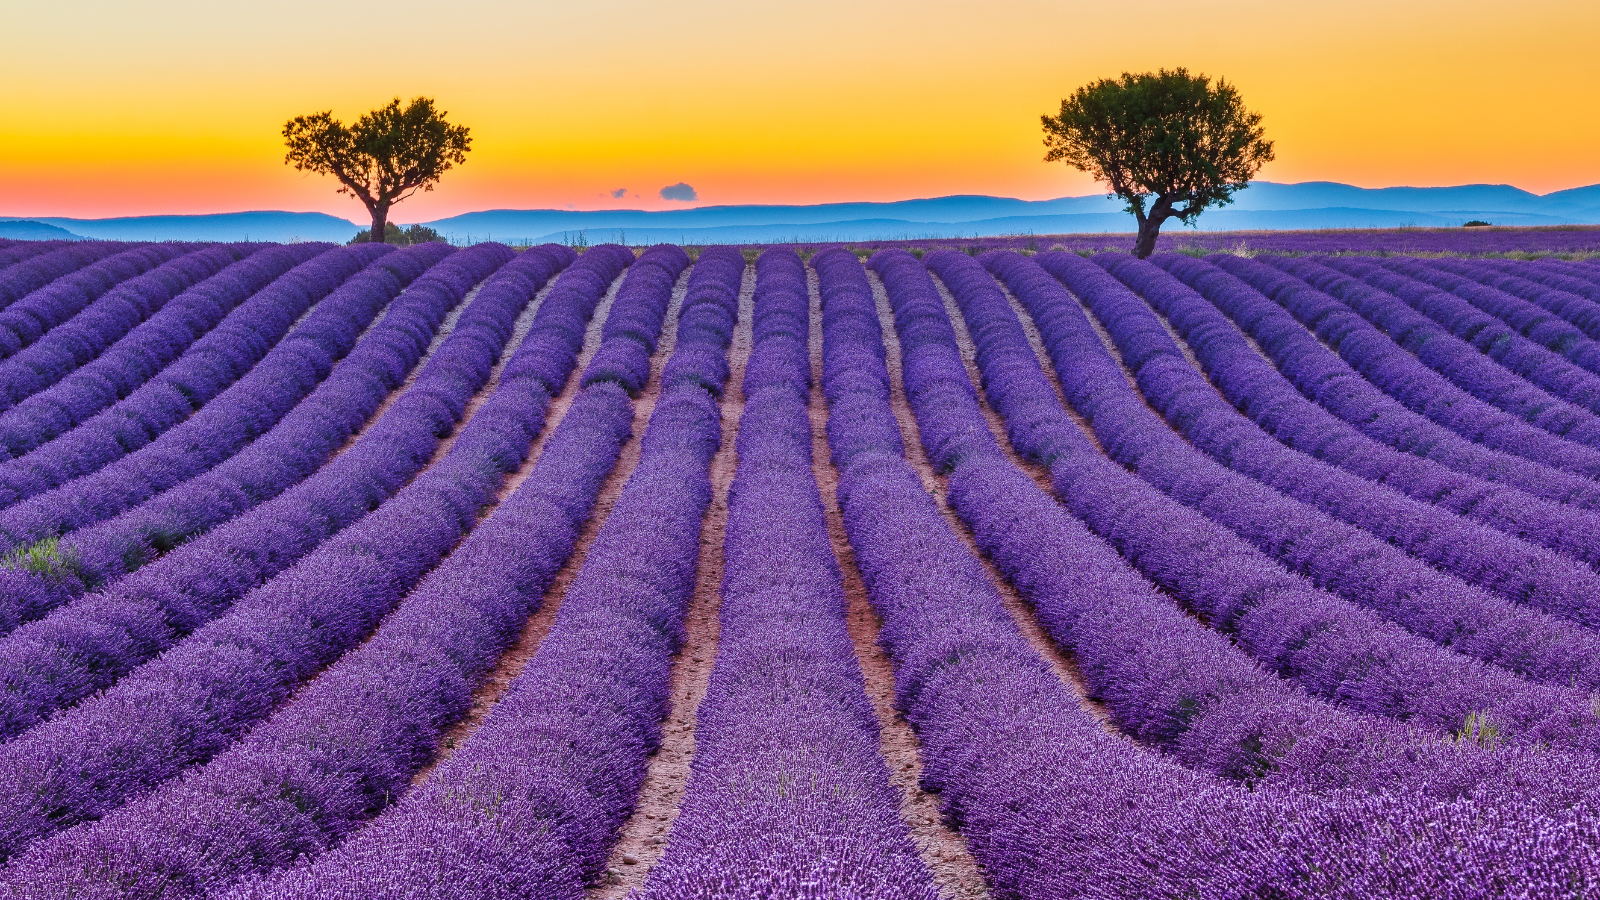 Travel to France in 4 seasons trip in spring - Lavender fields